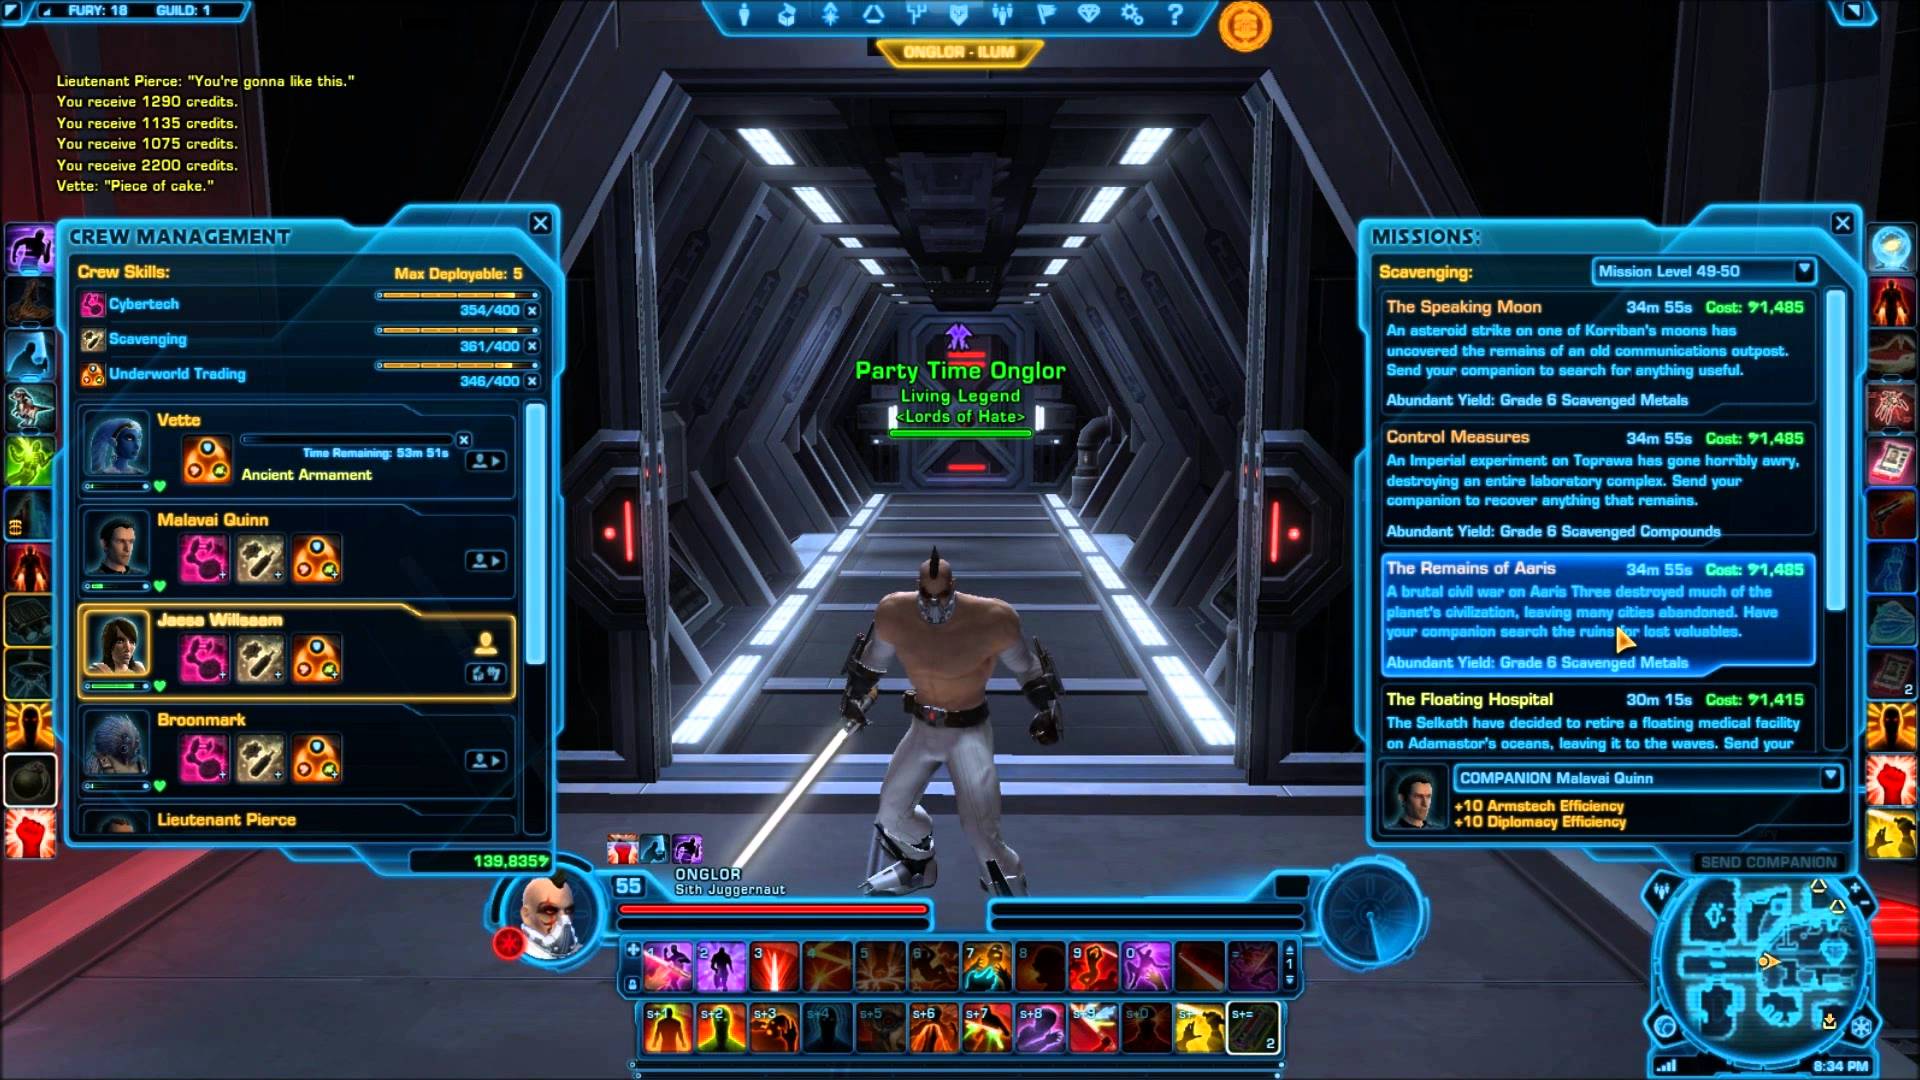 Clarification on Endgame Crafting in SWTOR Fallen Empire